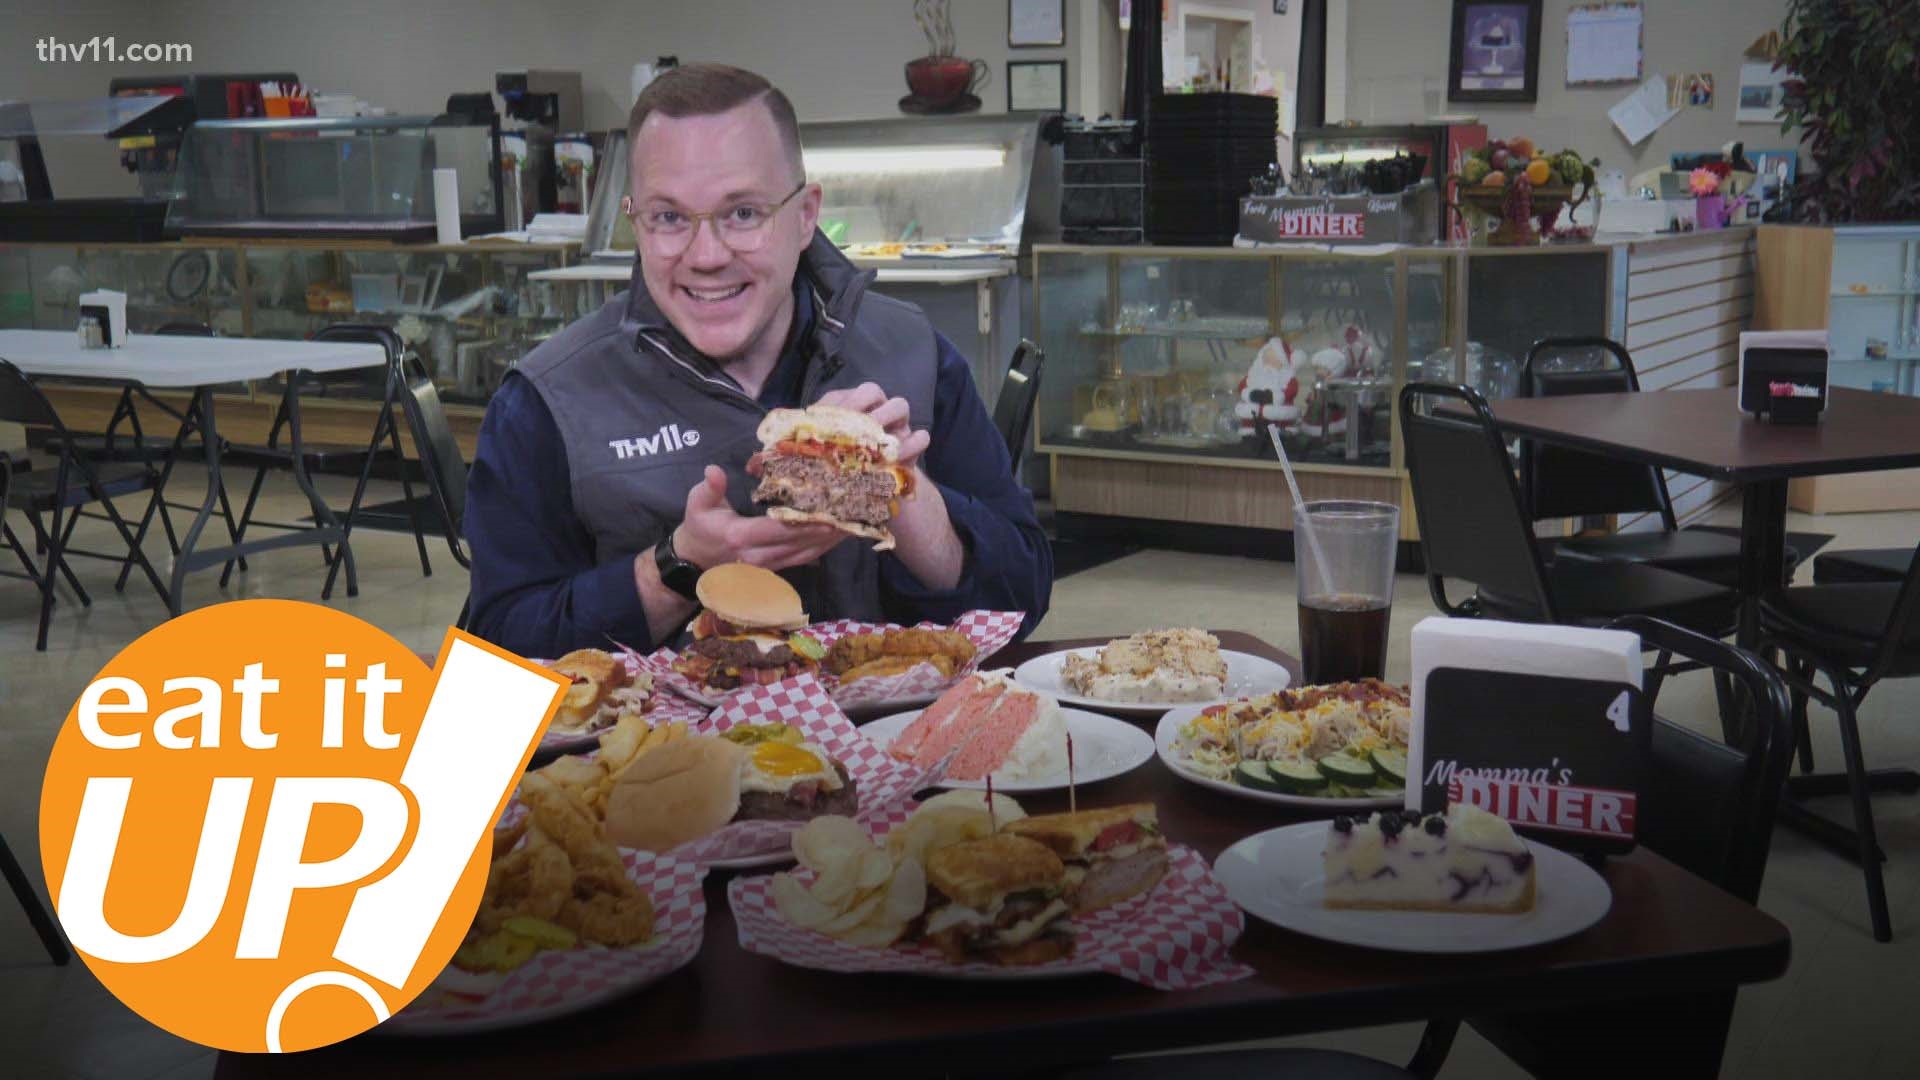 In this week's episode of Eat It Up, Skot takes us to Momma's Diner, a local restaurant known for its delicious southern comfort food.